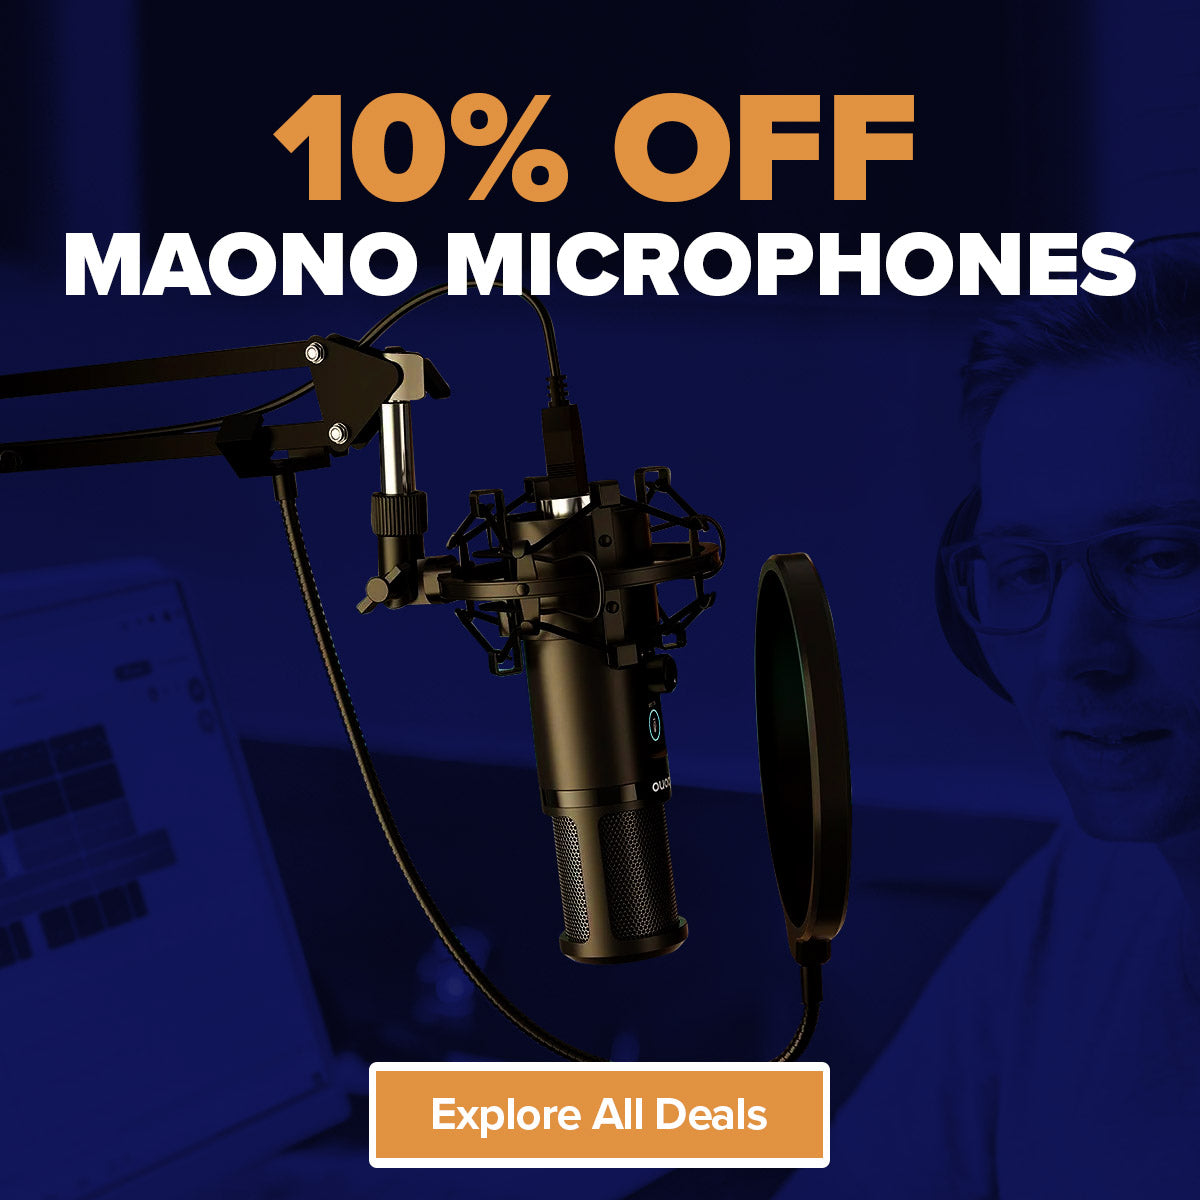 Save 10% off Maono Microphones with Maplin's January Sale deals!